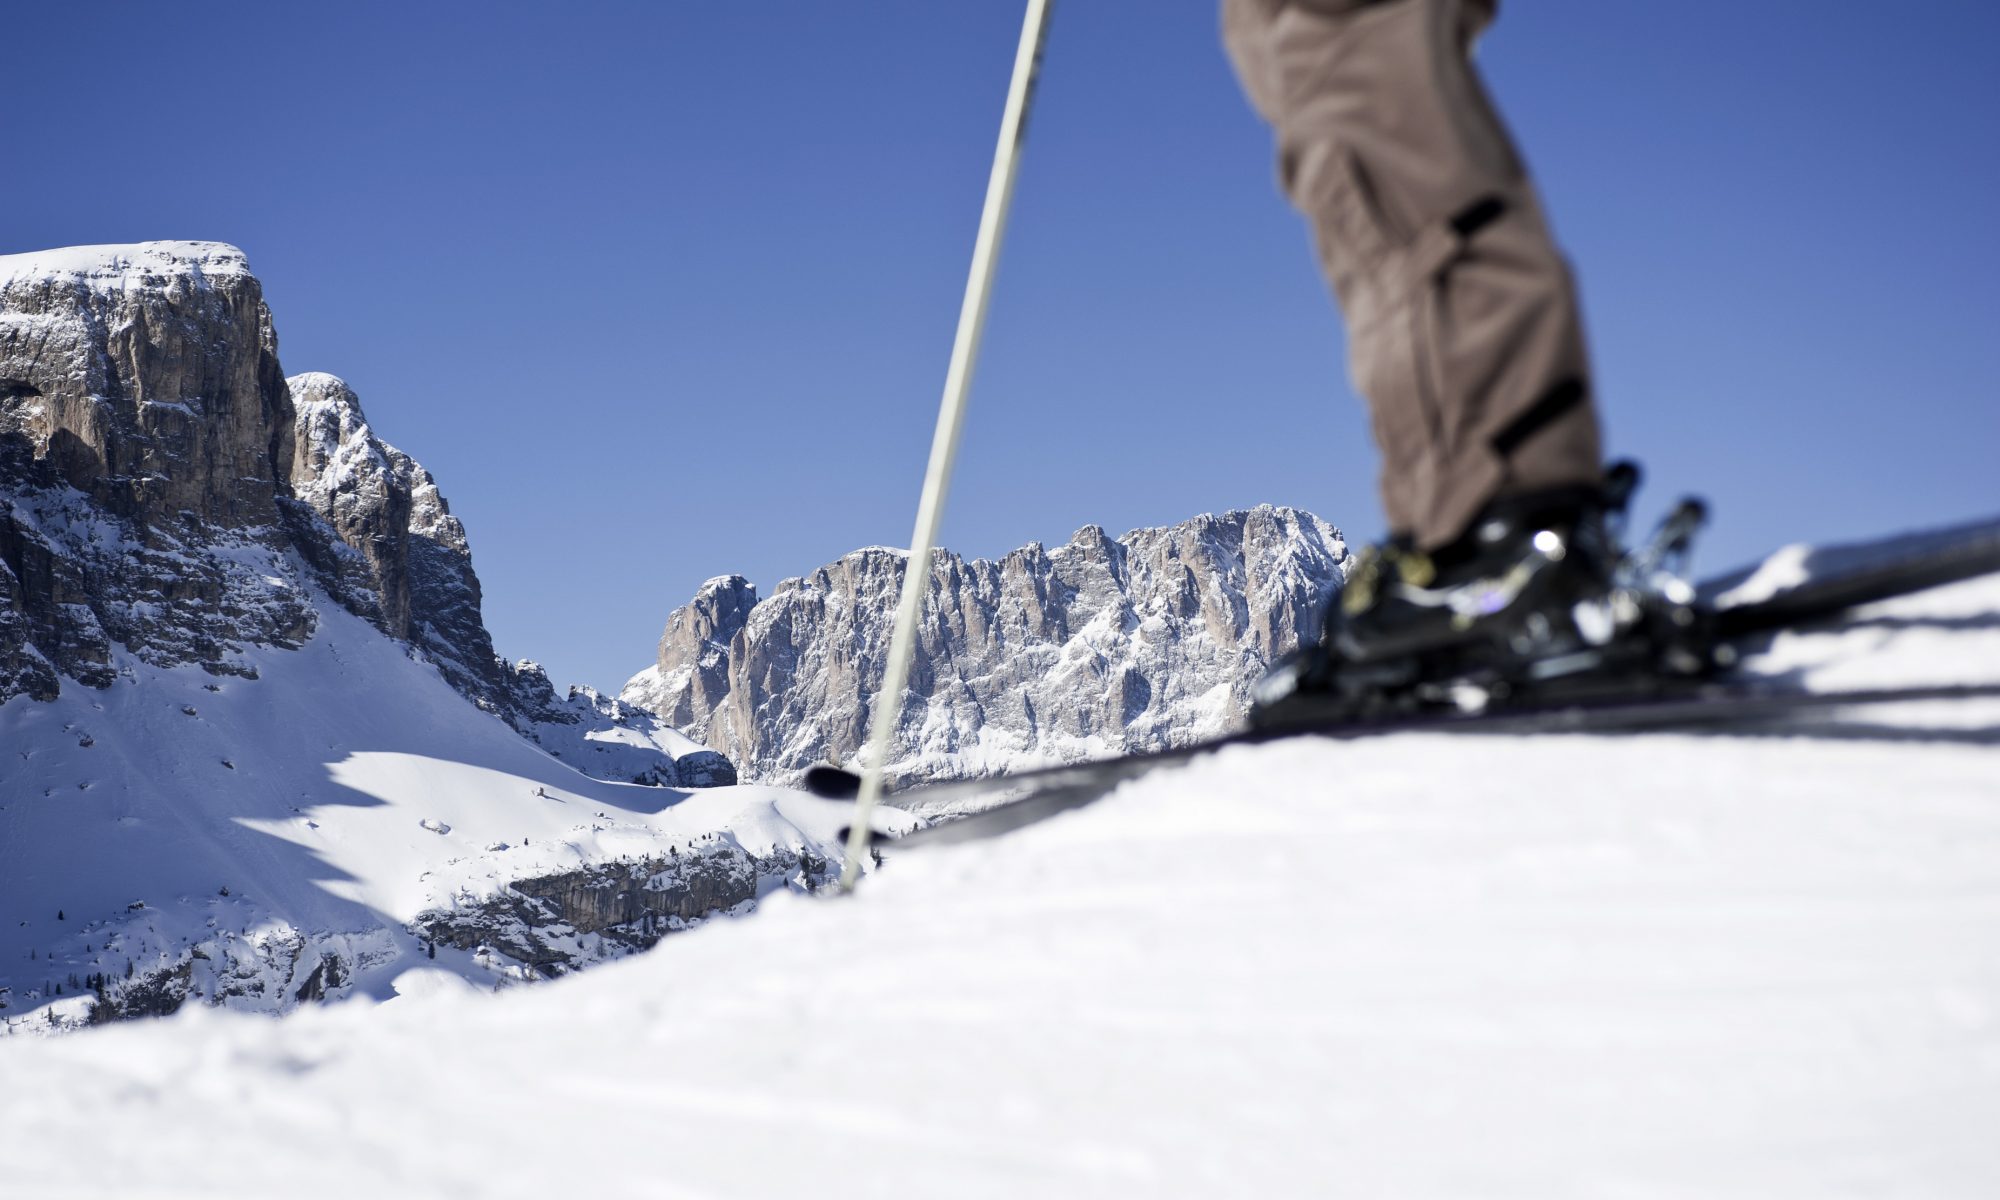 These unique Dolomite vistas encompass the extensive Alta Badia ski area, with magnificent views of the Sasso Lungo Peak and the Sella Mountain Range. Season Opening’s at the different ski resorts of Sudtirol and Christmas Markets. Photo: IDM Sudtirol.